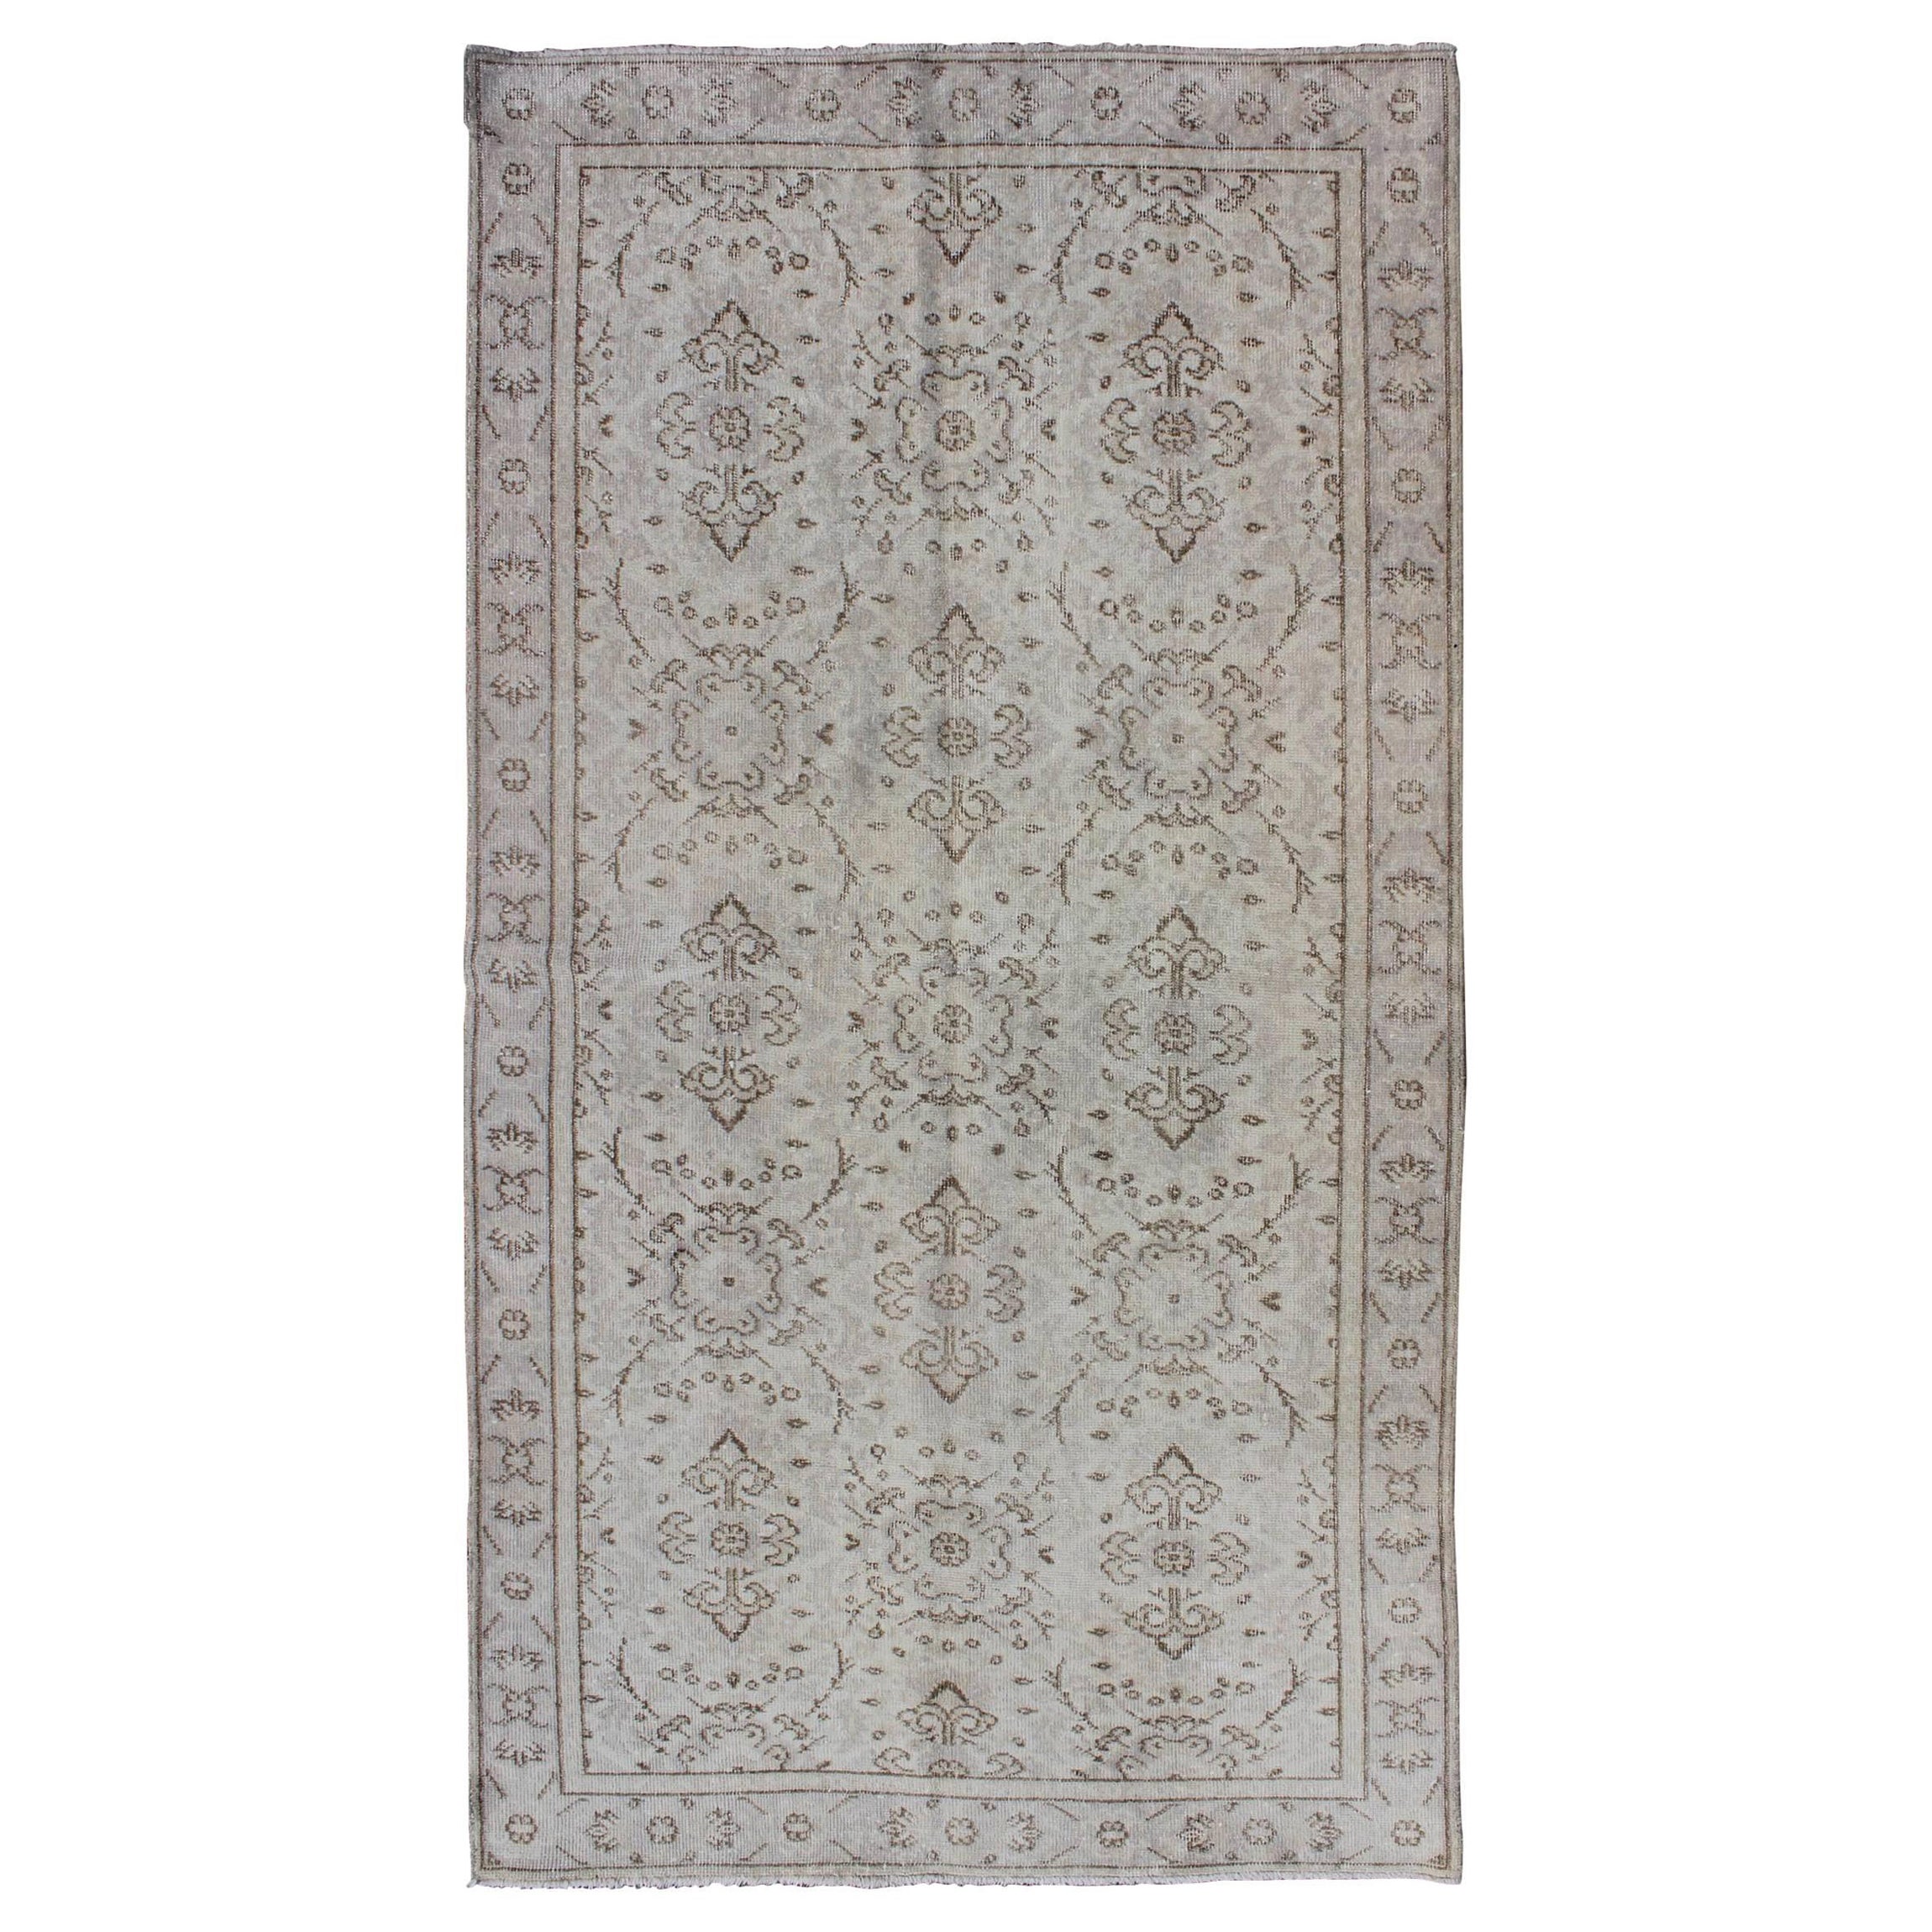 Hand Knotted All-Over Design Vintage Turkish Oushak Rug in Shades of Cream